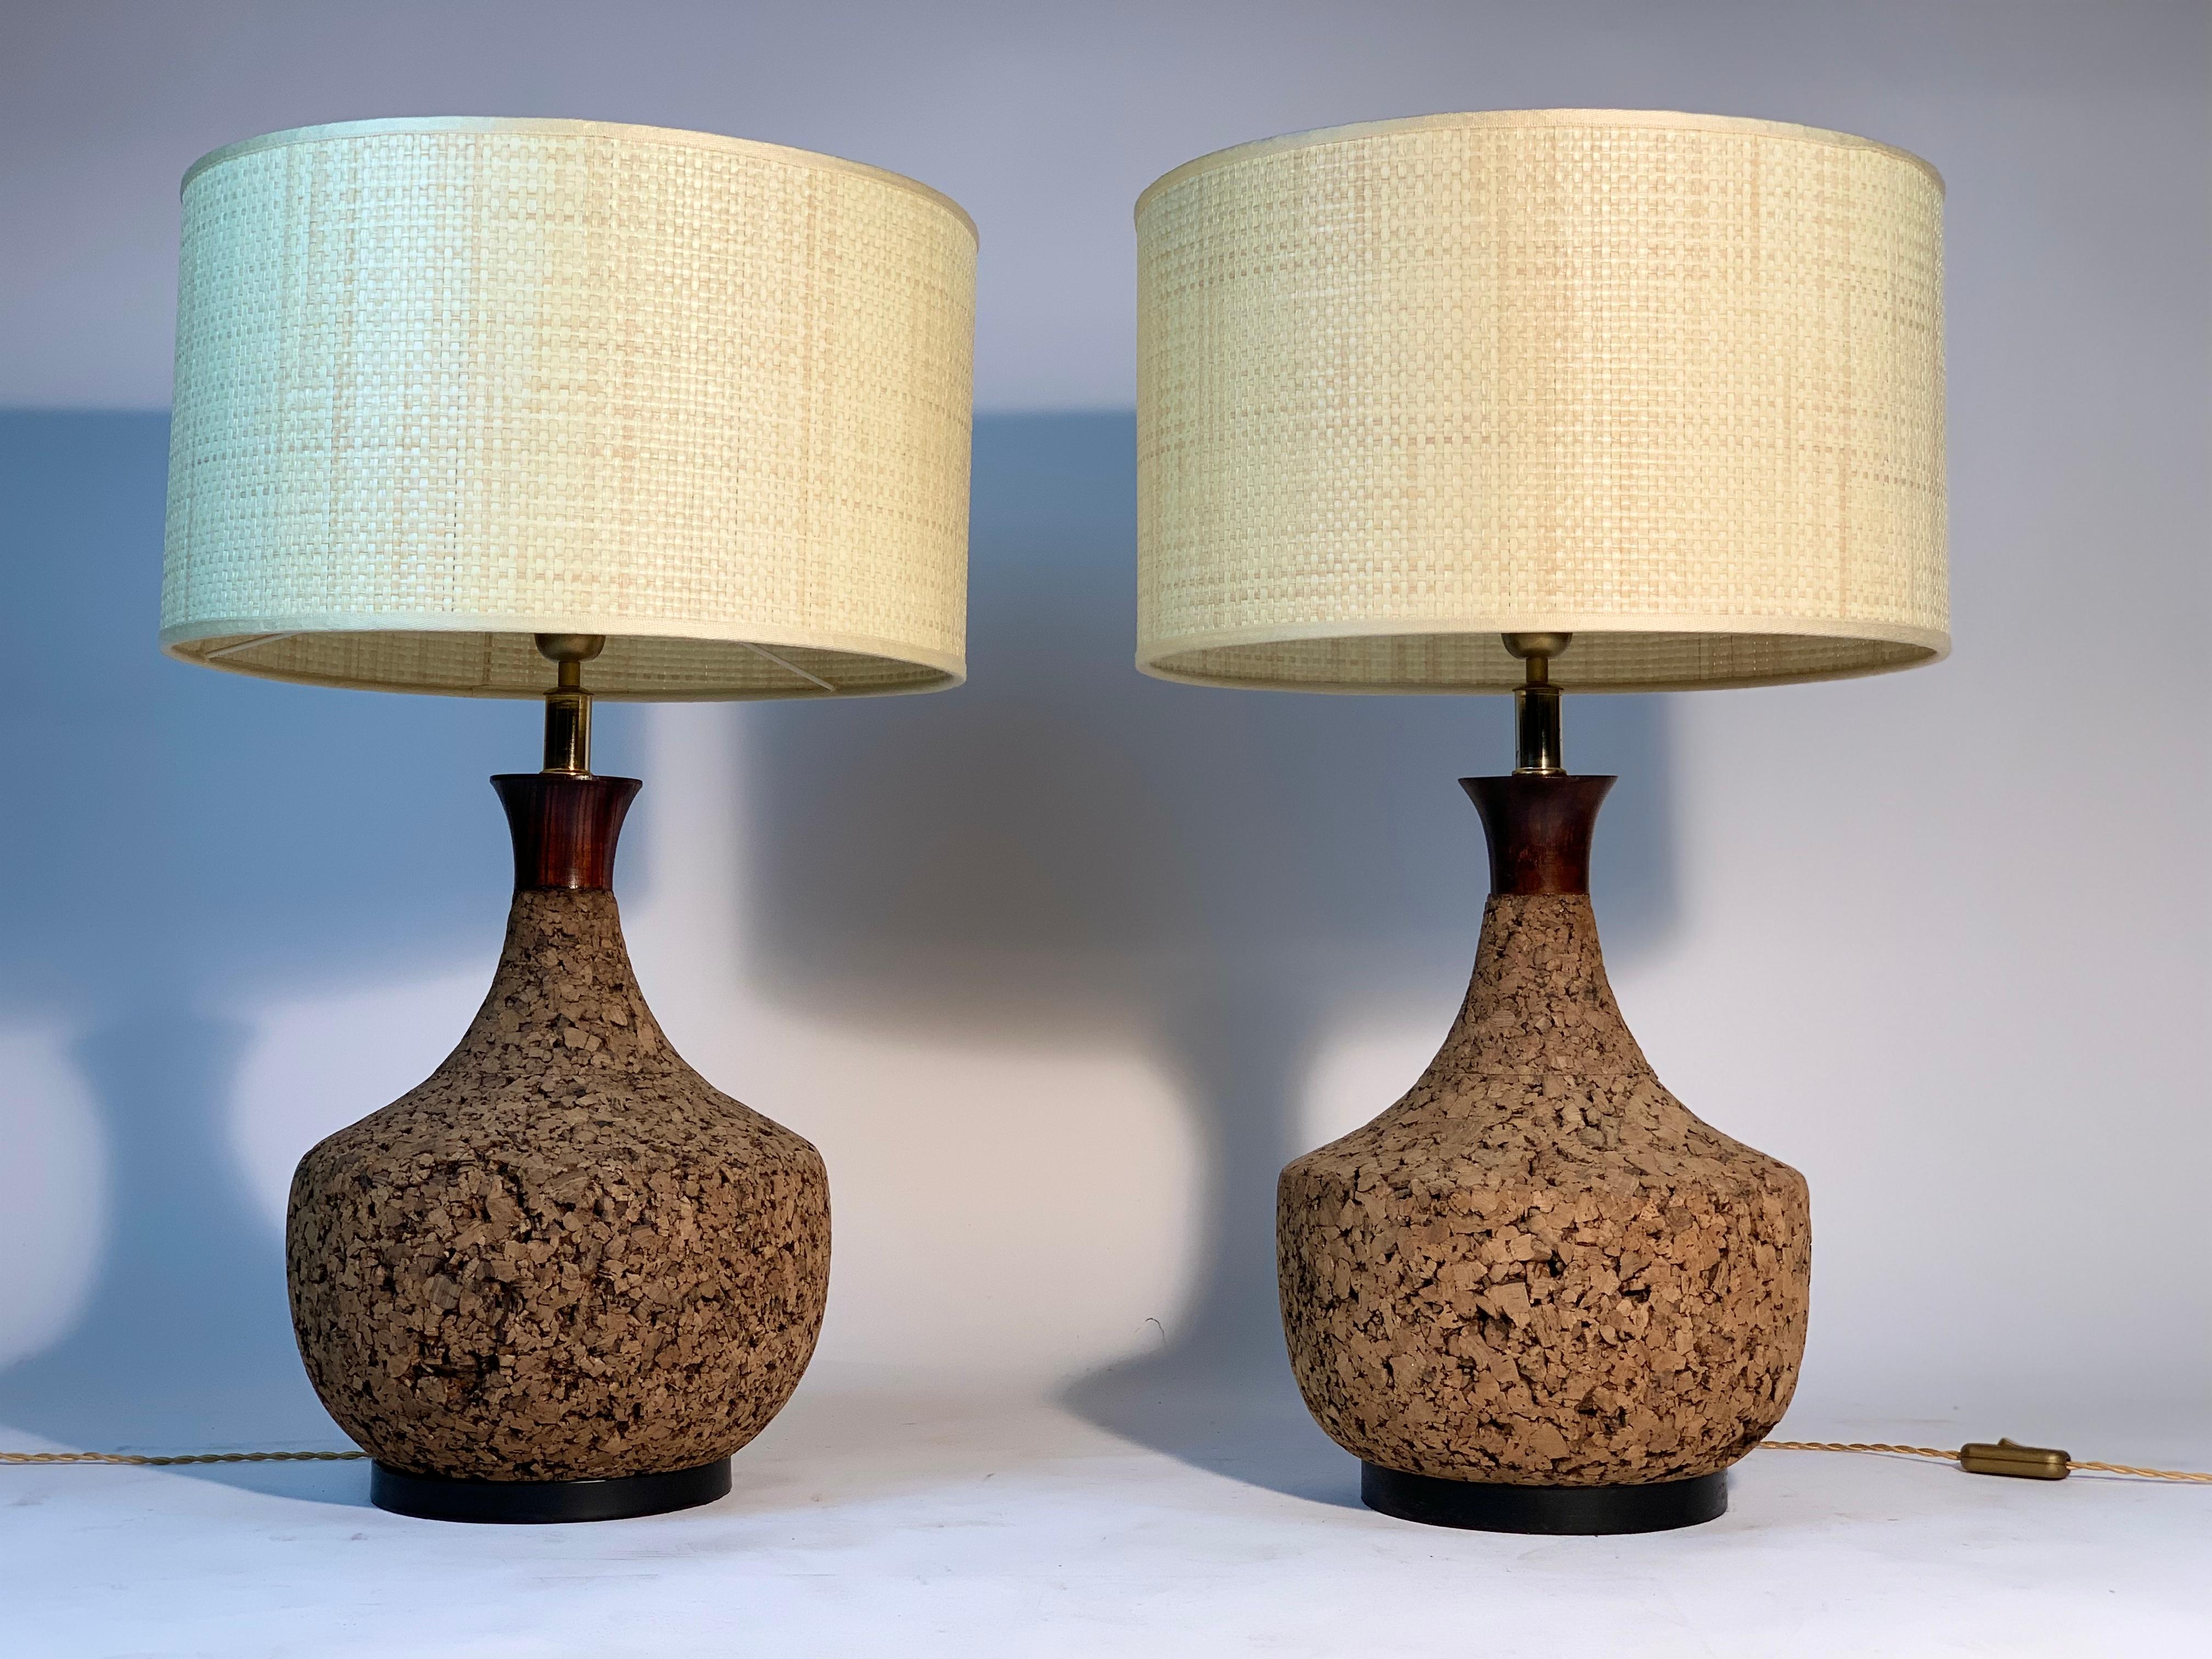 Pair of Italian table lamps in natural cork with dark lacquered metal base, in the shape of a pot-bellied bottle.
The collar at the top is made of wood. 
Italian production of the 1960s.
They feature a woven raffia lampshade.
The measurements in